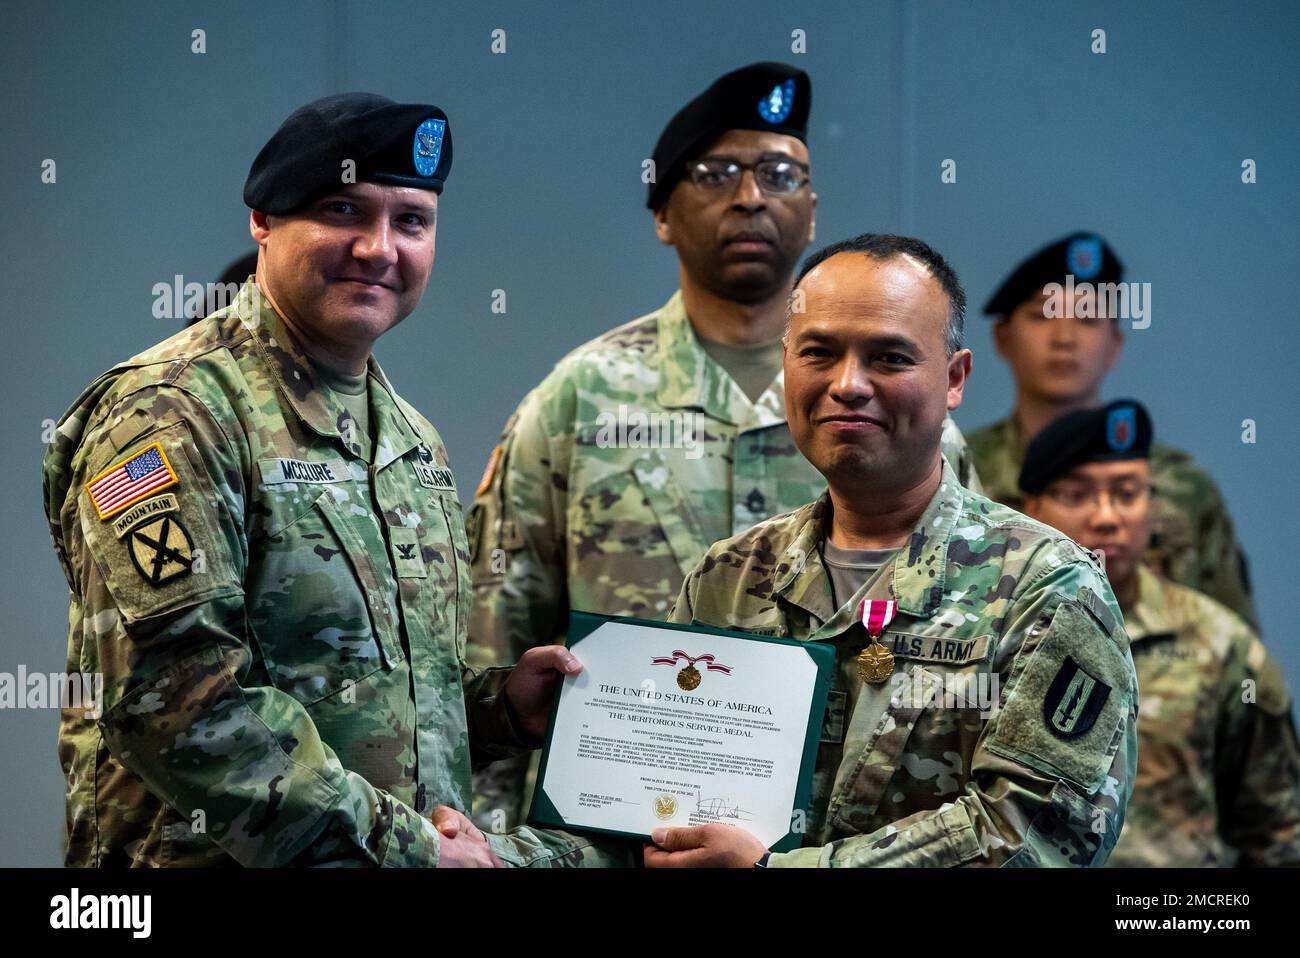 U.S Army Col. Chirstopher S. McClure, 1st Theater Signal Brigade Commander and Lt. Col. Sirian Thepsoumane holing the U.S. Army Meritorious Service Medal award at the 1st Theater Signal Brigade Headquarters in Camp Humphreys, South Korea on July 8, 2022. Thepsoumane was recognized for his services as the United States Army Communications Information Systems Activity Pacific Director. Stock Photo